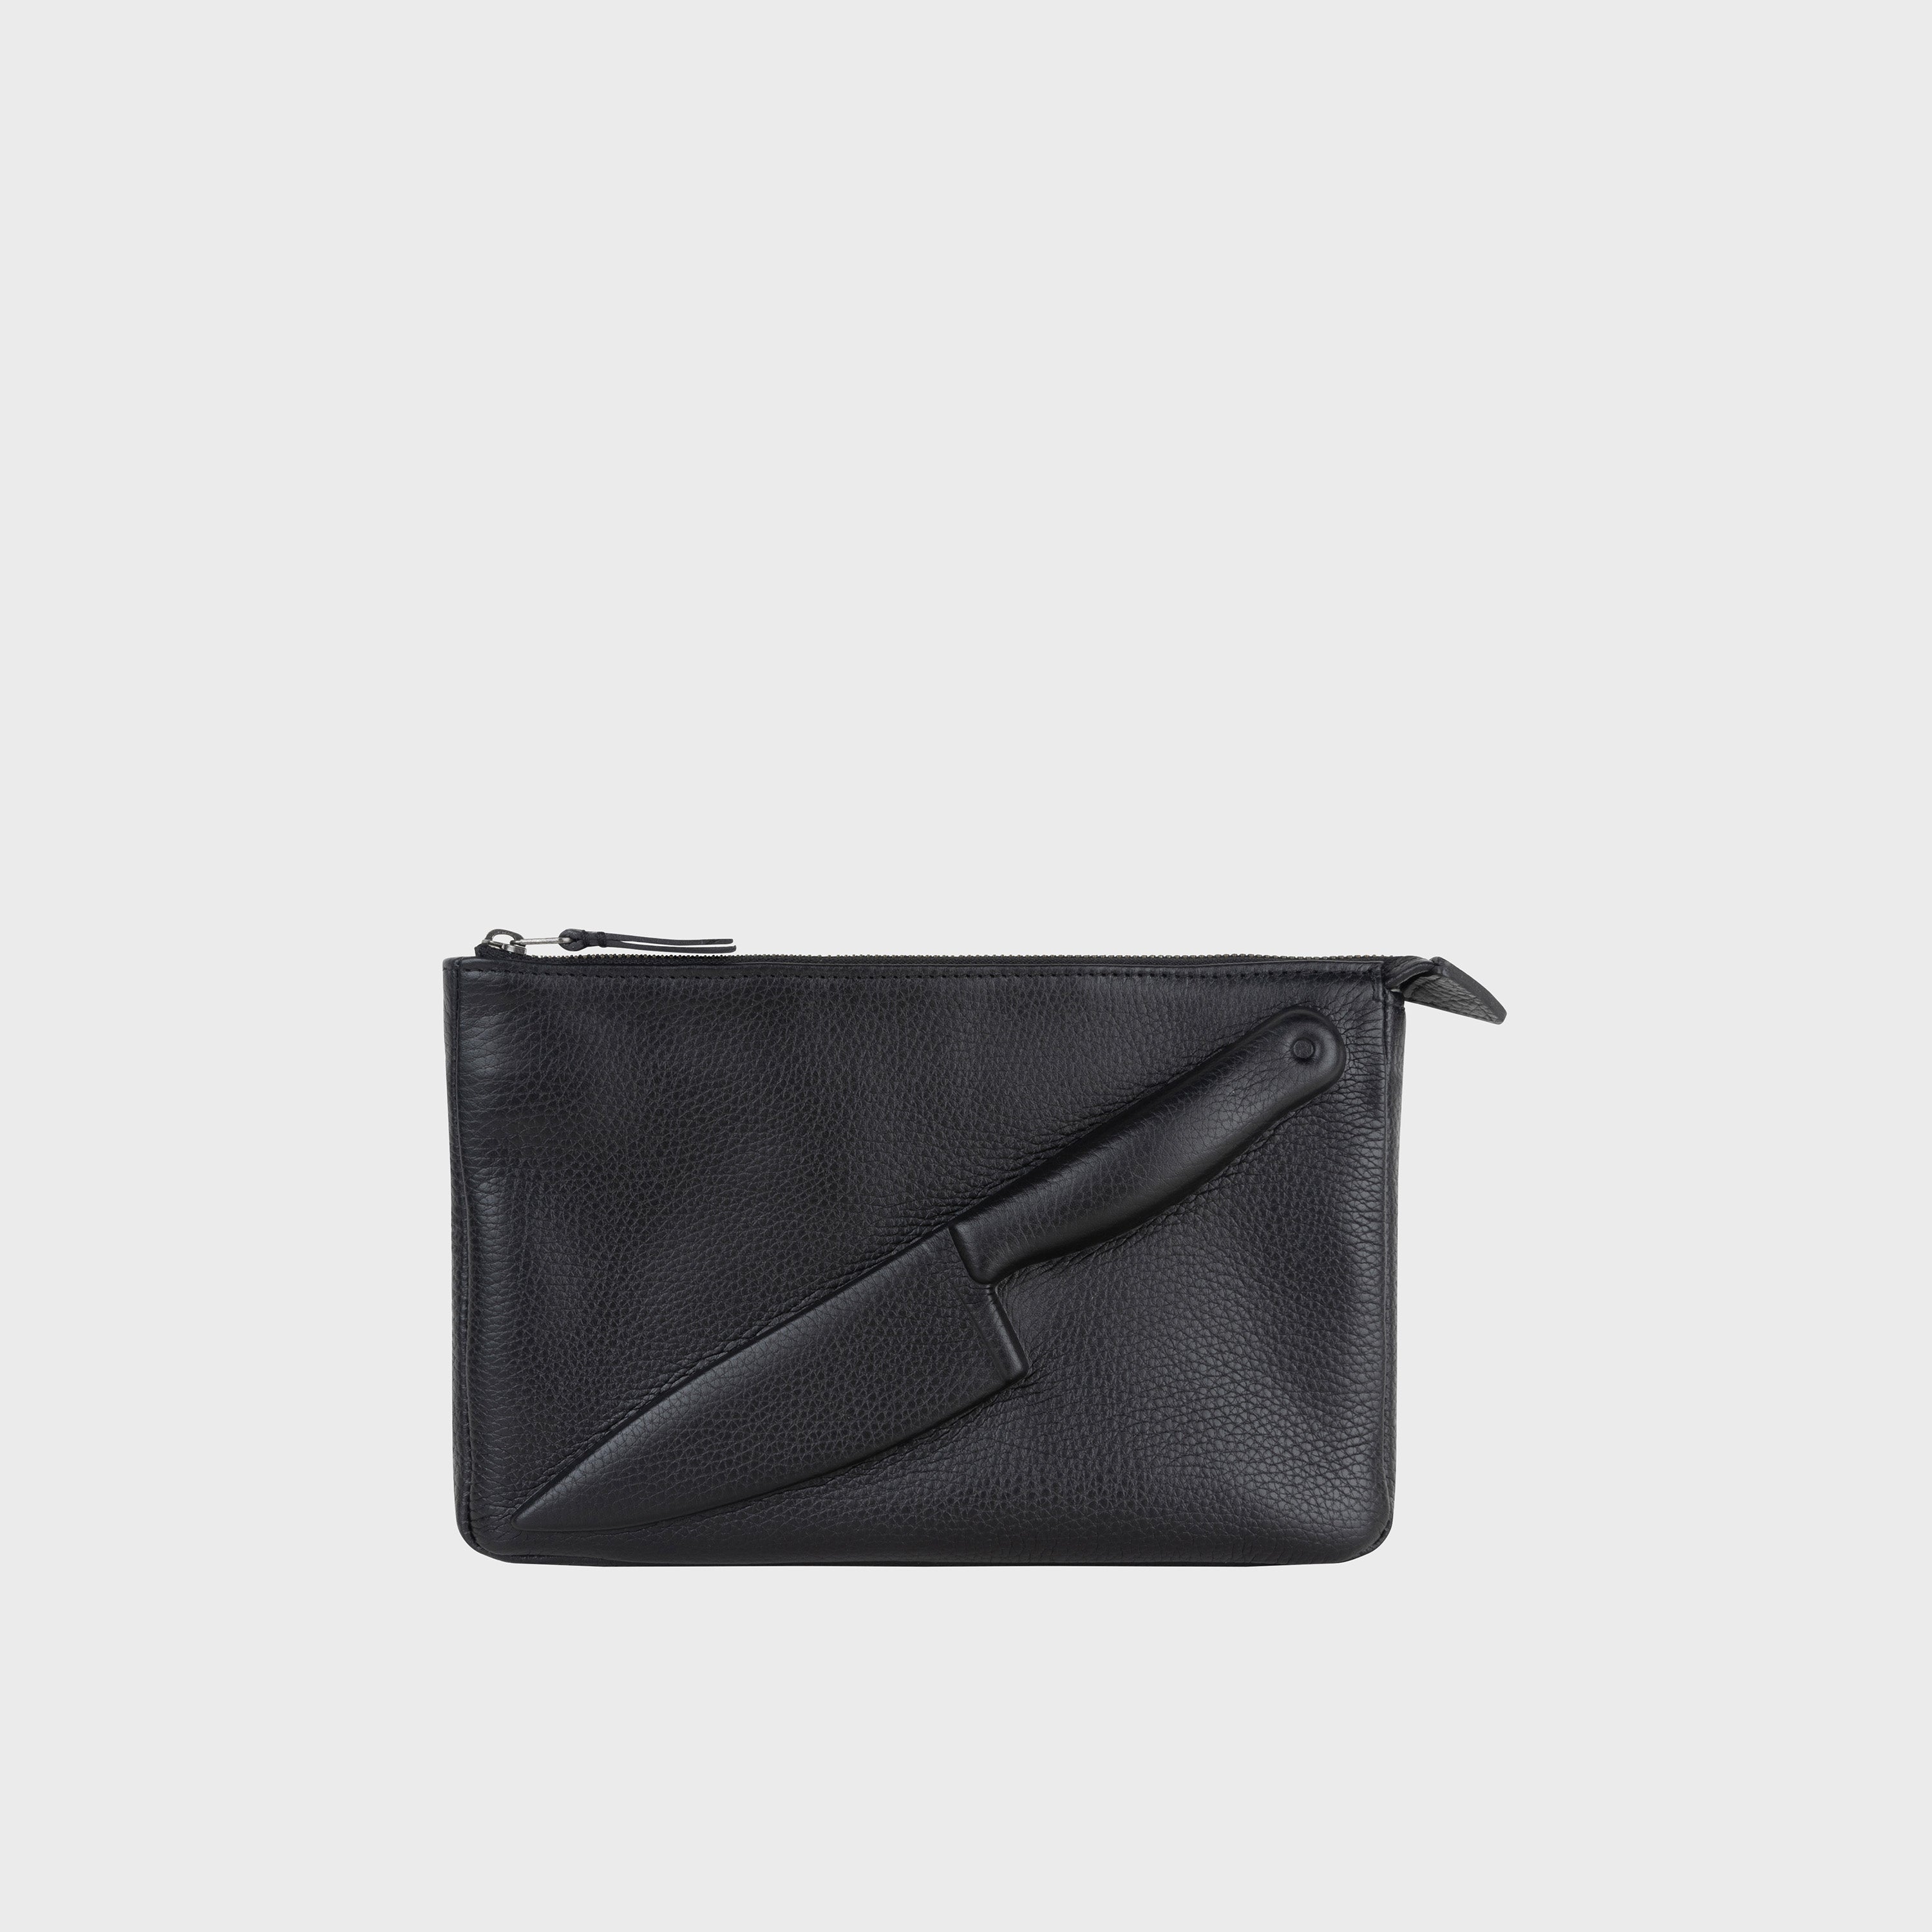 Vlieger & Vandam - Classic Small Knife Black, embossed leather bag